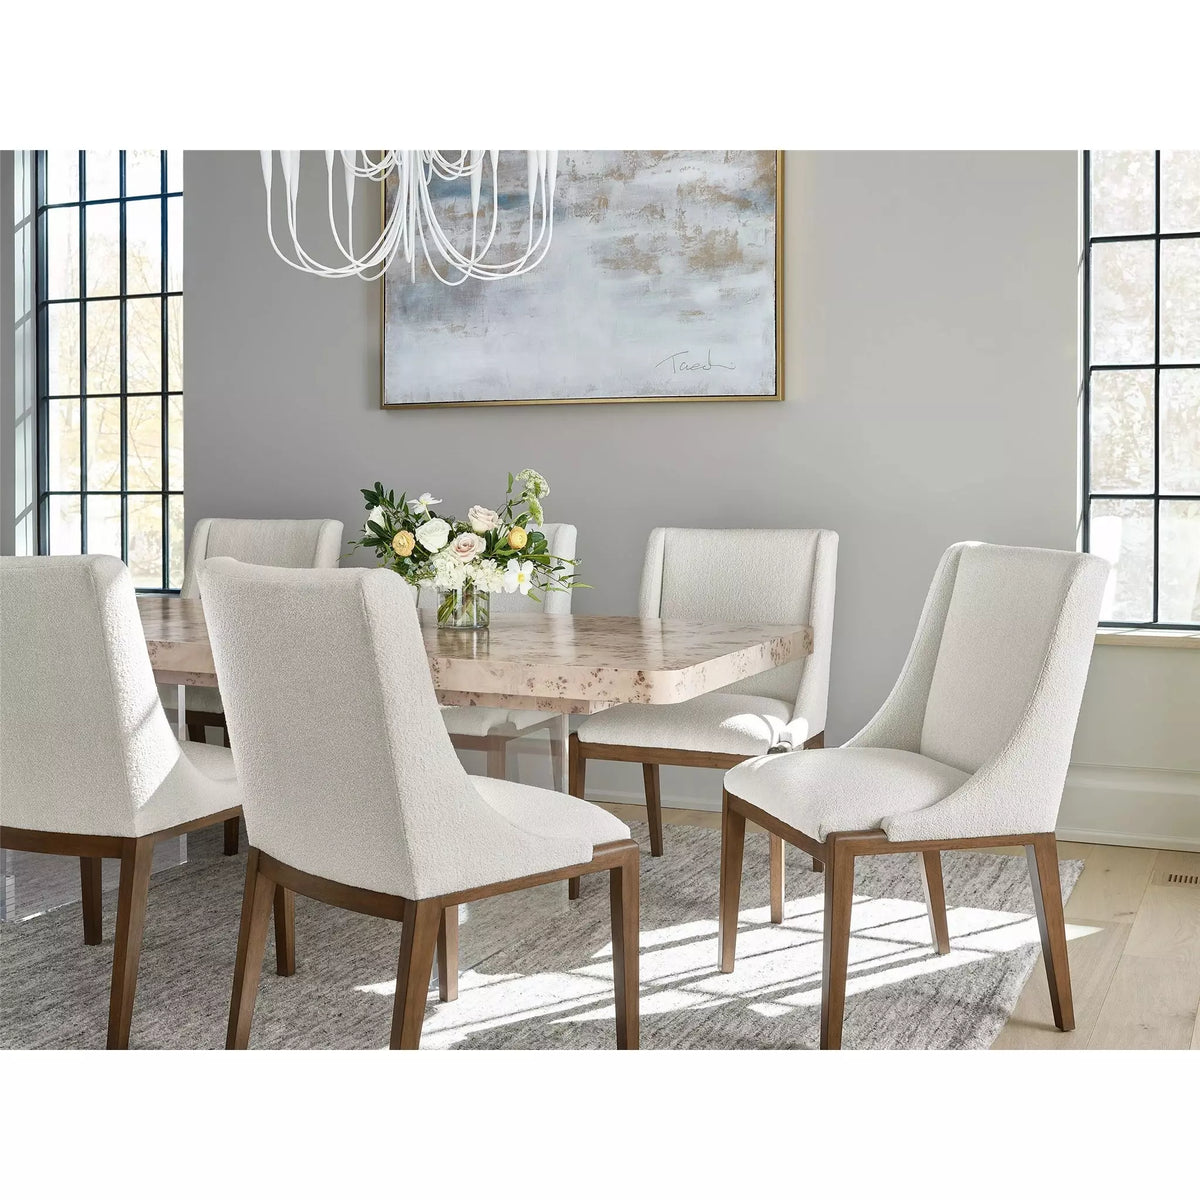 Tranquility Dining Table - Be Bold Furniture